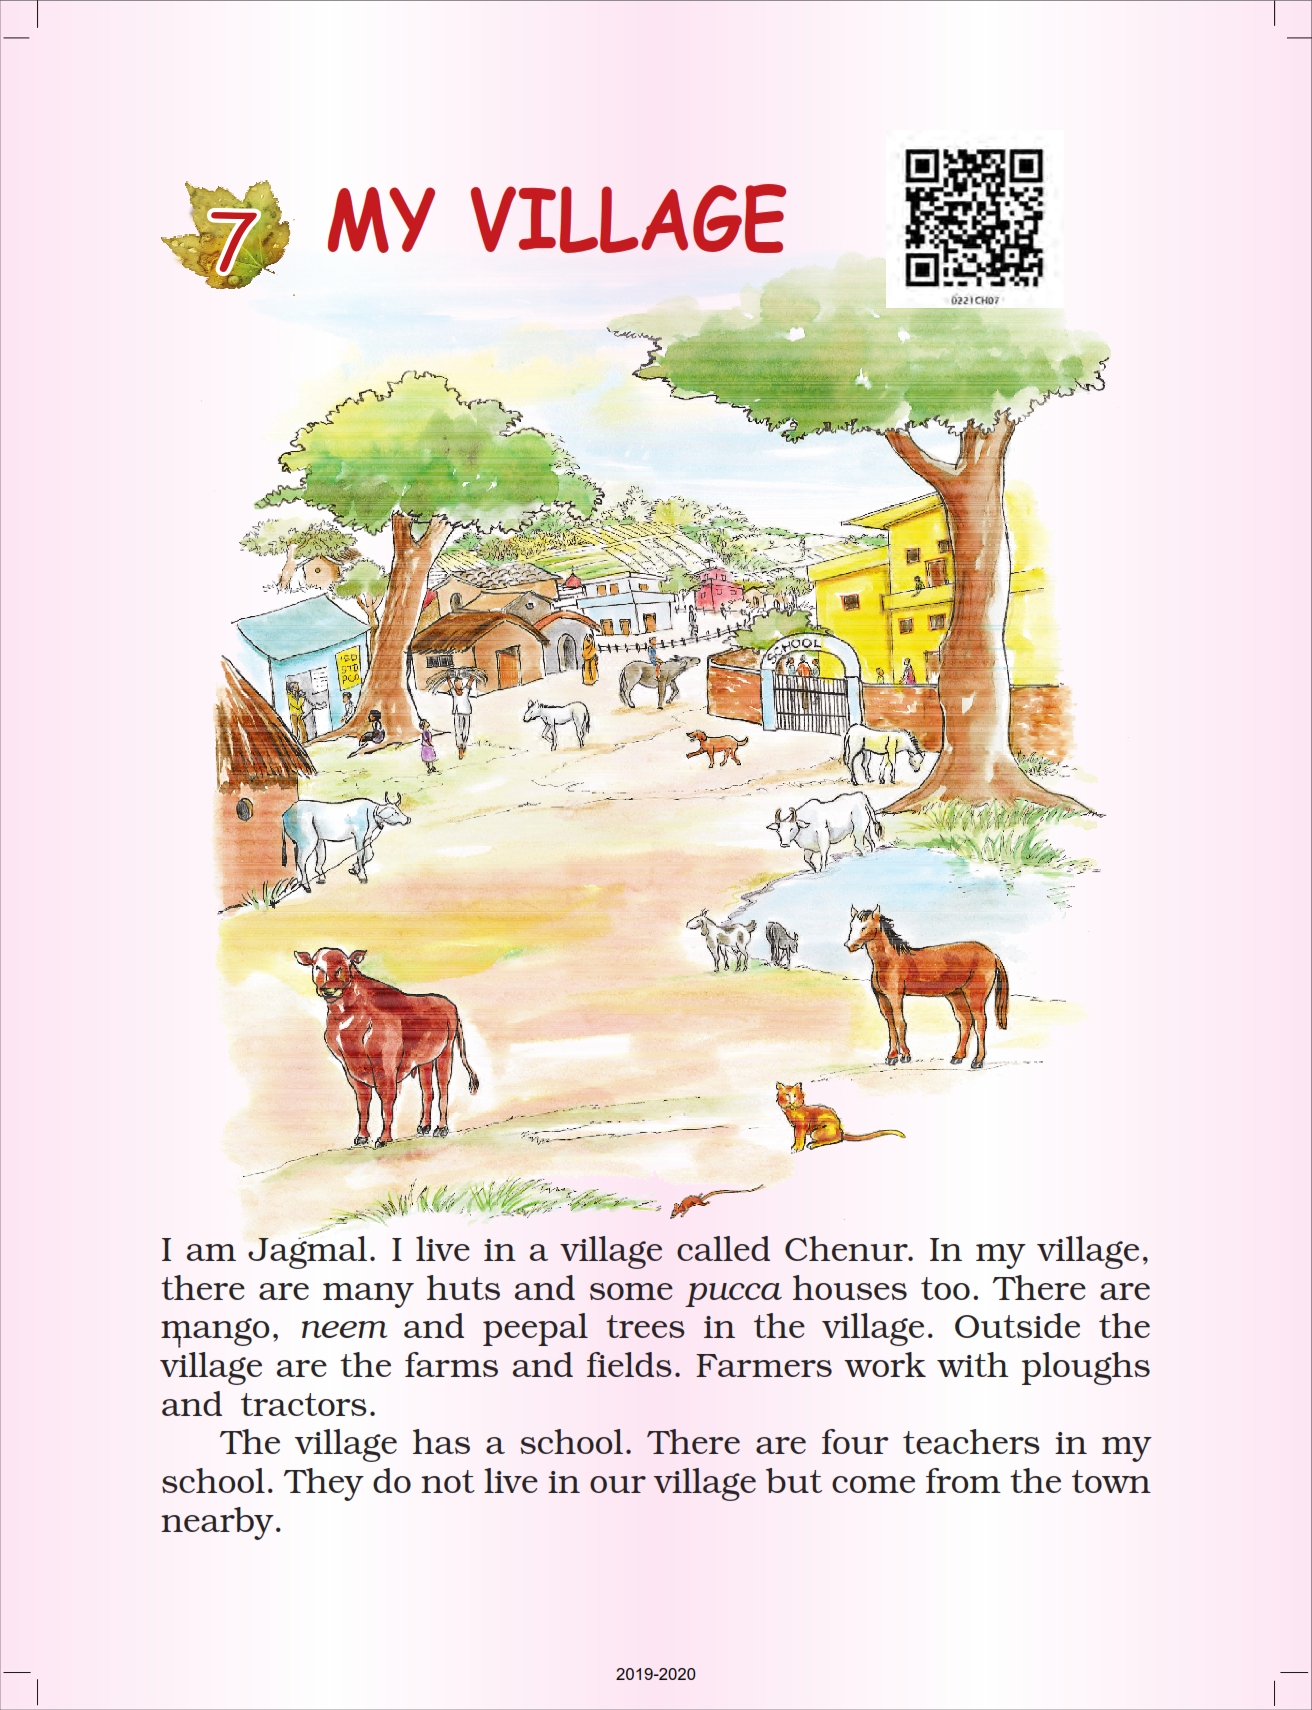 NCERT Book Class 2 English (Raindrops) Chapter 7 My Village - Page 1